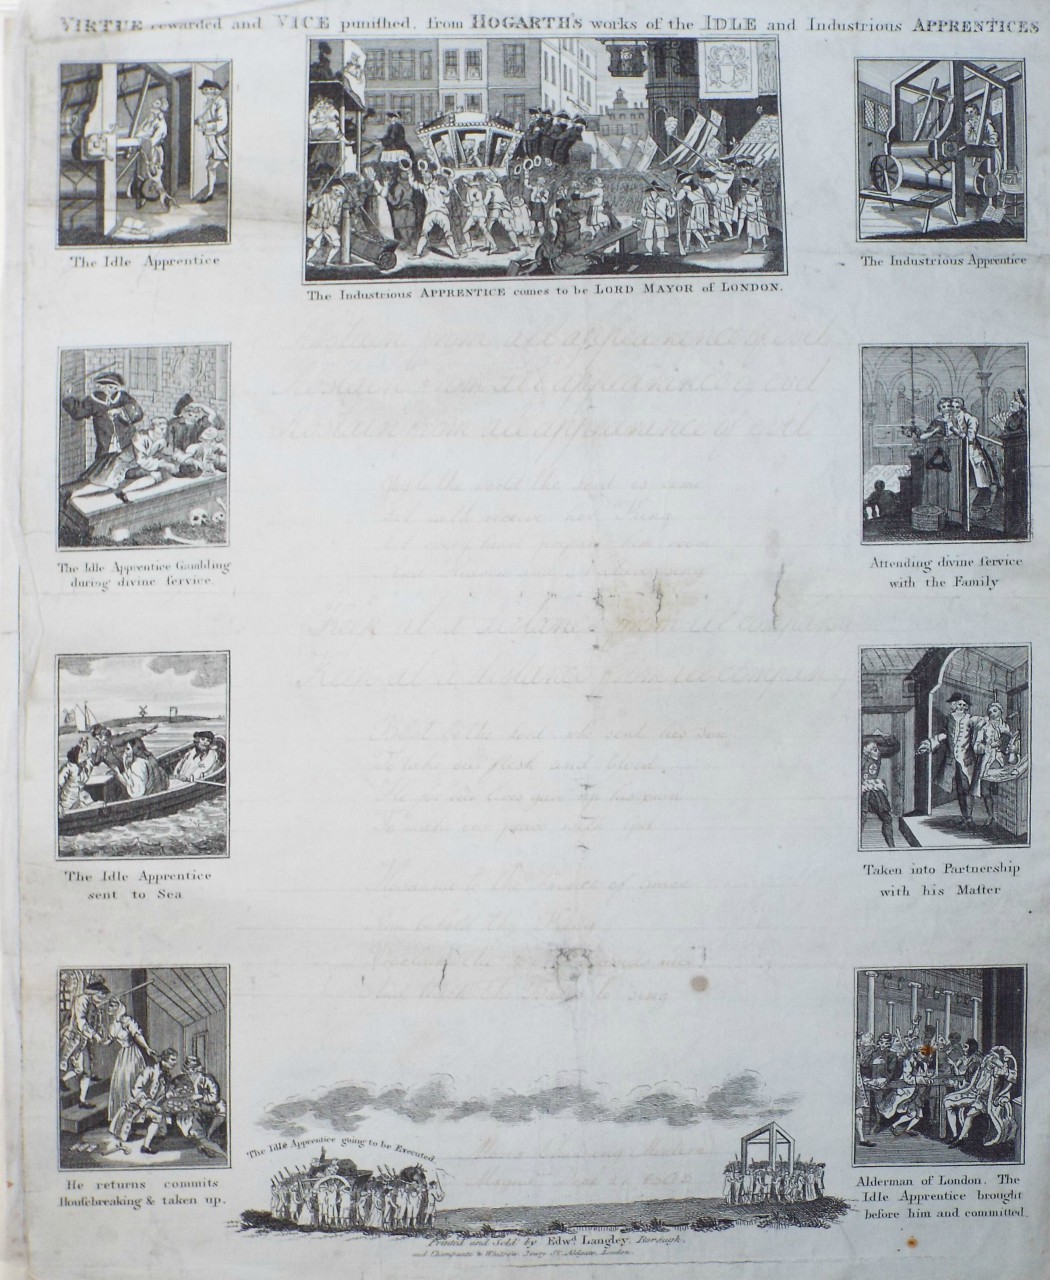 Print - Virtue and rewarded and Vice punished, from Hogarth's works of the Idle and Industrious Apprentices - Edwd.